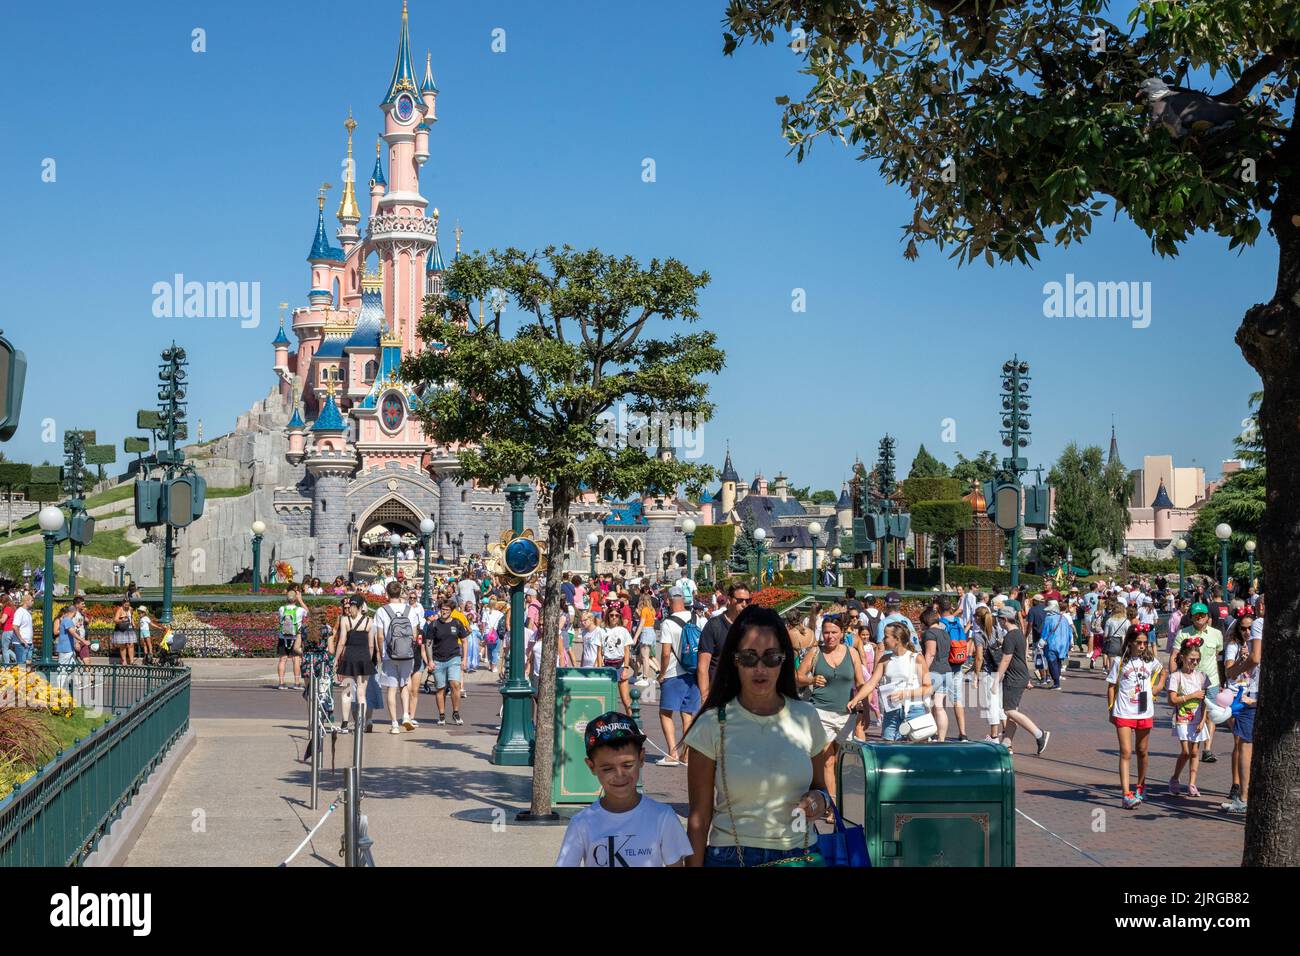 A low-angle view of a Disneyland Paris Castle in France Stock Photo